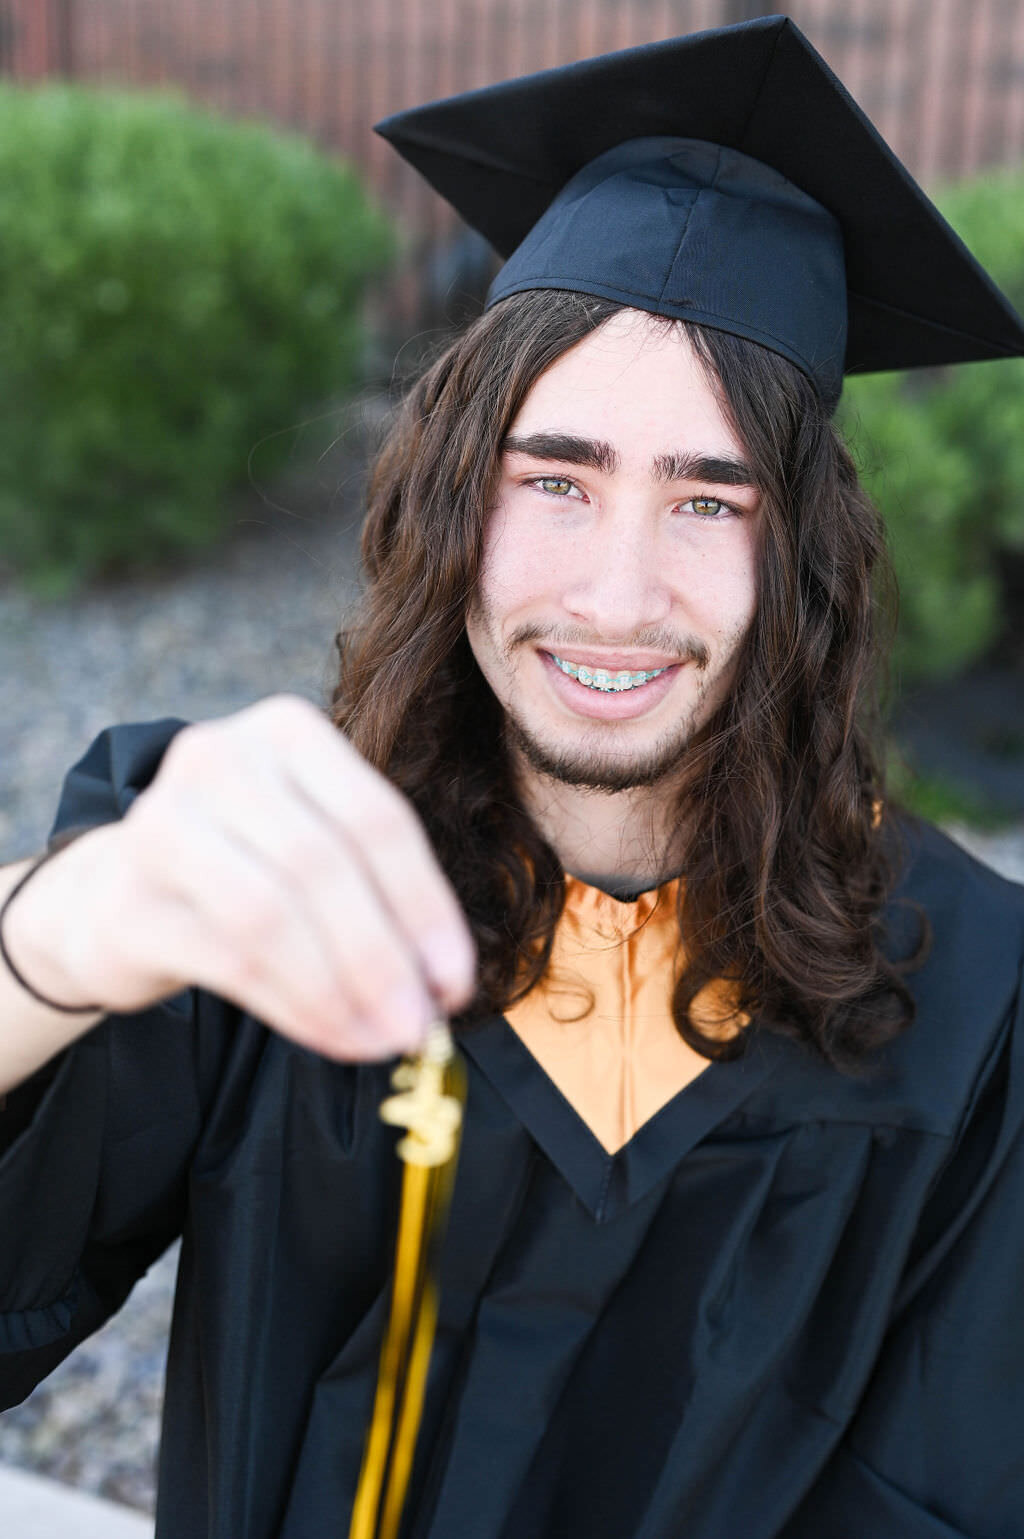 A man smiling and holding up a graduation tassel.